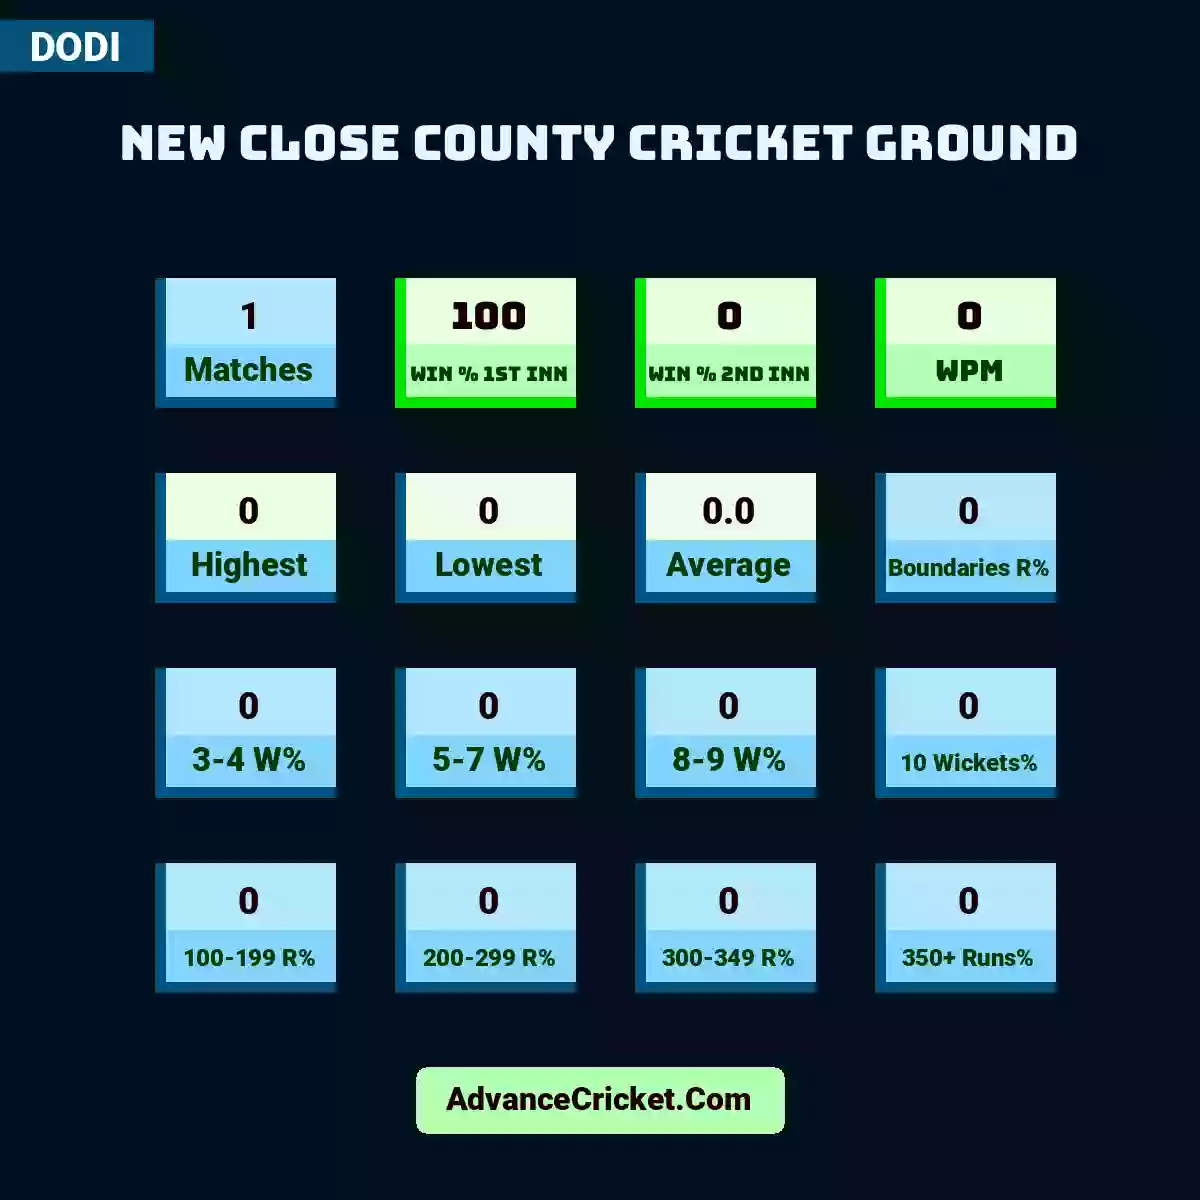 Image showing New Close County Cricket Ground with Matches: 1, Win % 1st Inn: 100, Win % 2nd Inn: 0, WPM: 0, Highest: 0, Lowest: 0, Average: 0.0, Boundaries R%: 0, 3-4 W%: 0, 5-7 W%: 0, 8-9 W%: 0, 10 Wickets%: 0, 100-199 R%: 0, 200-299 R%: 0, 300-349 R%: 0, 350+ Runs%: 0.